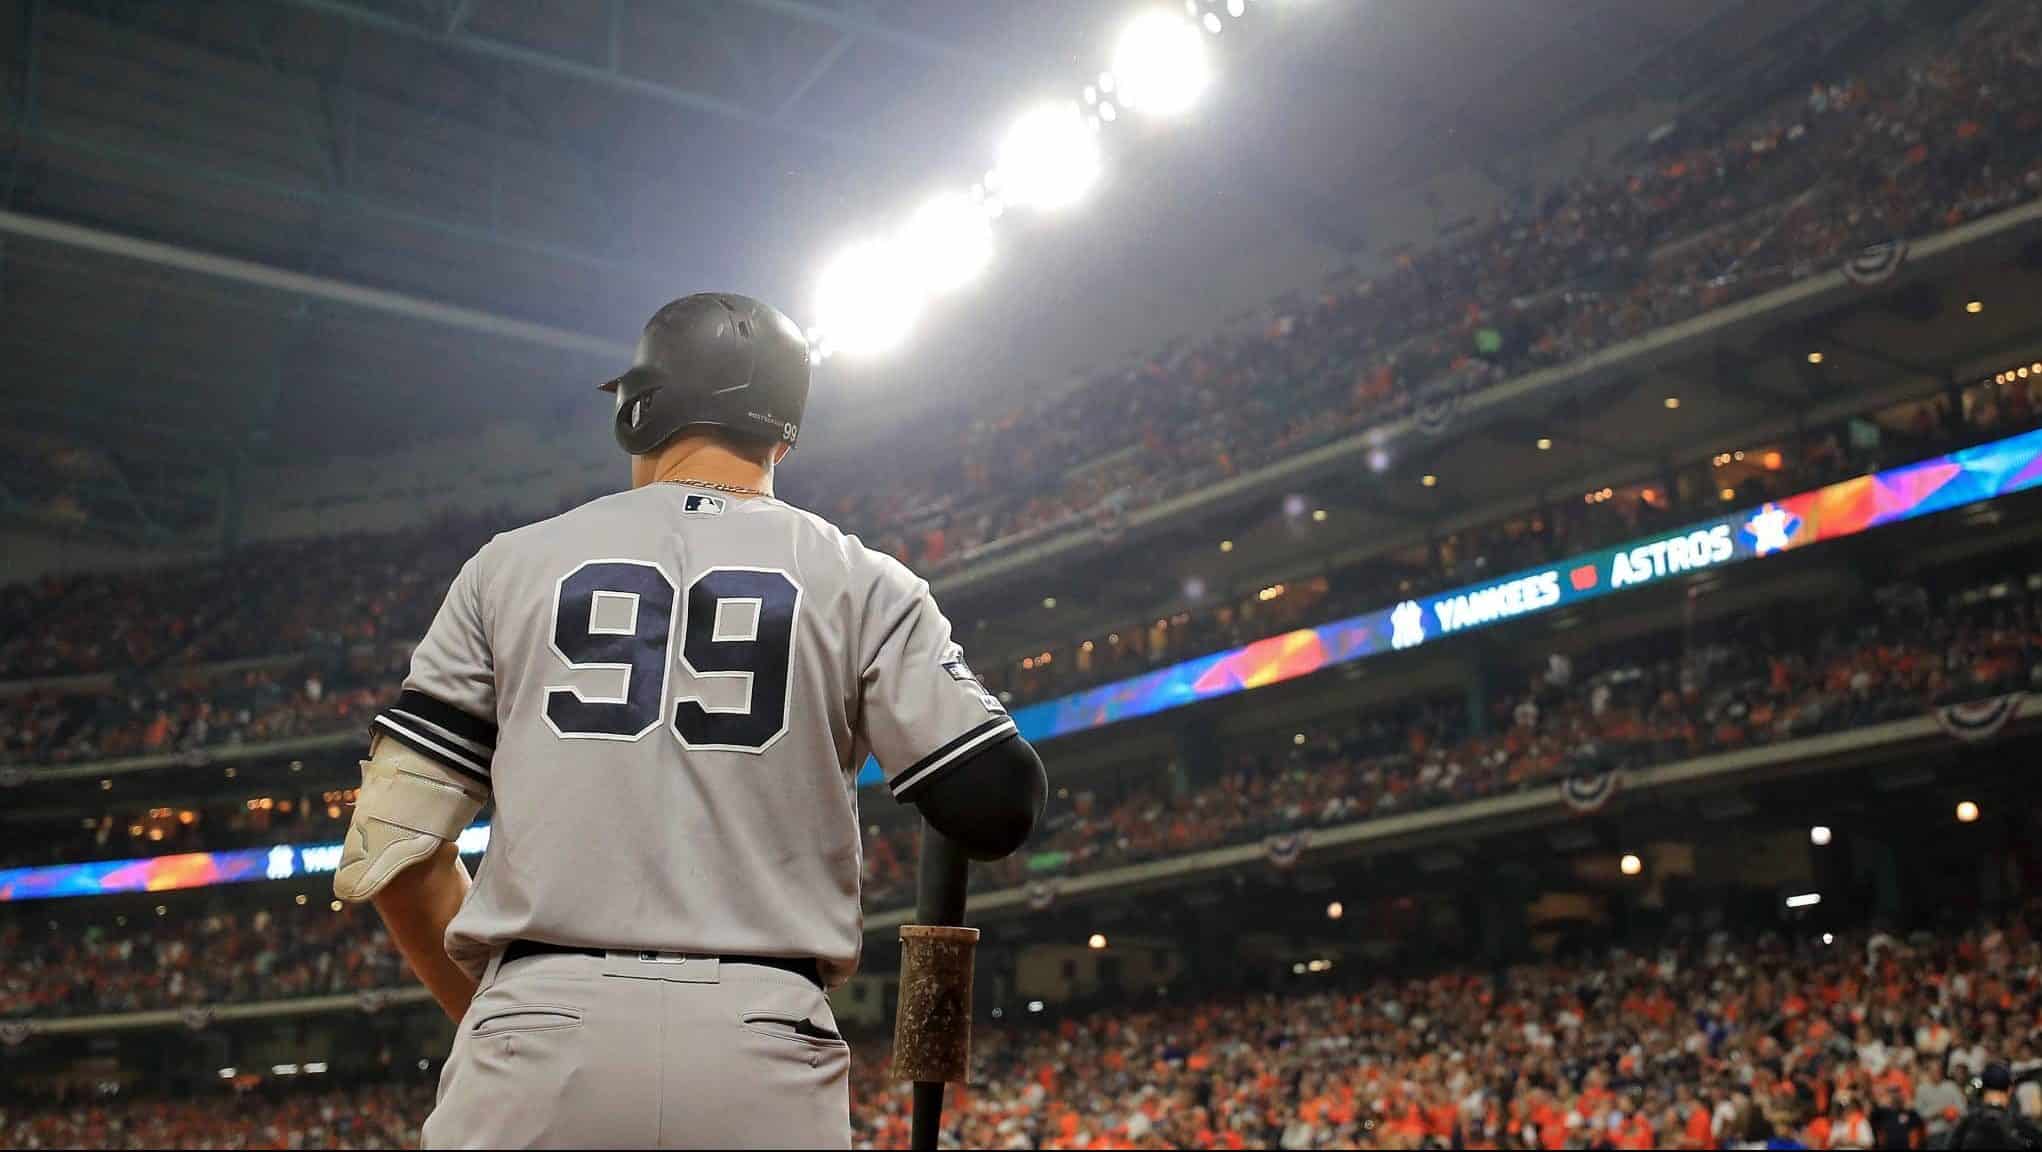 HOUSTON, TEXAS - OCTOBER 12: Aaron Judge #99 of the New York Yankees stands in the on deck circle against the Houston Astros during the first inning in game one of the American League Championship Series at Minute Maid Park on October 12, 2019 in Houston, Texas.